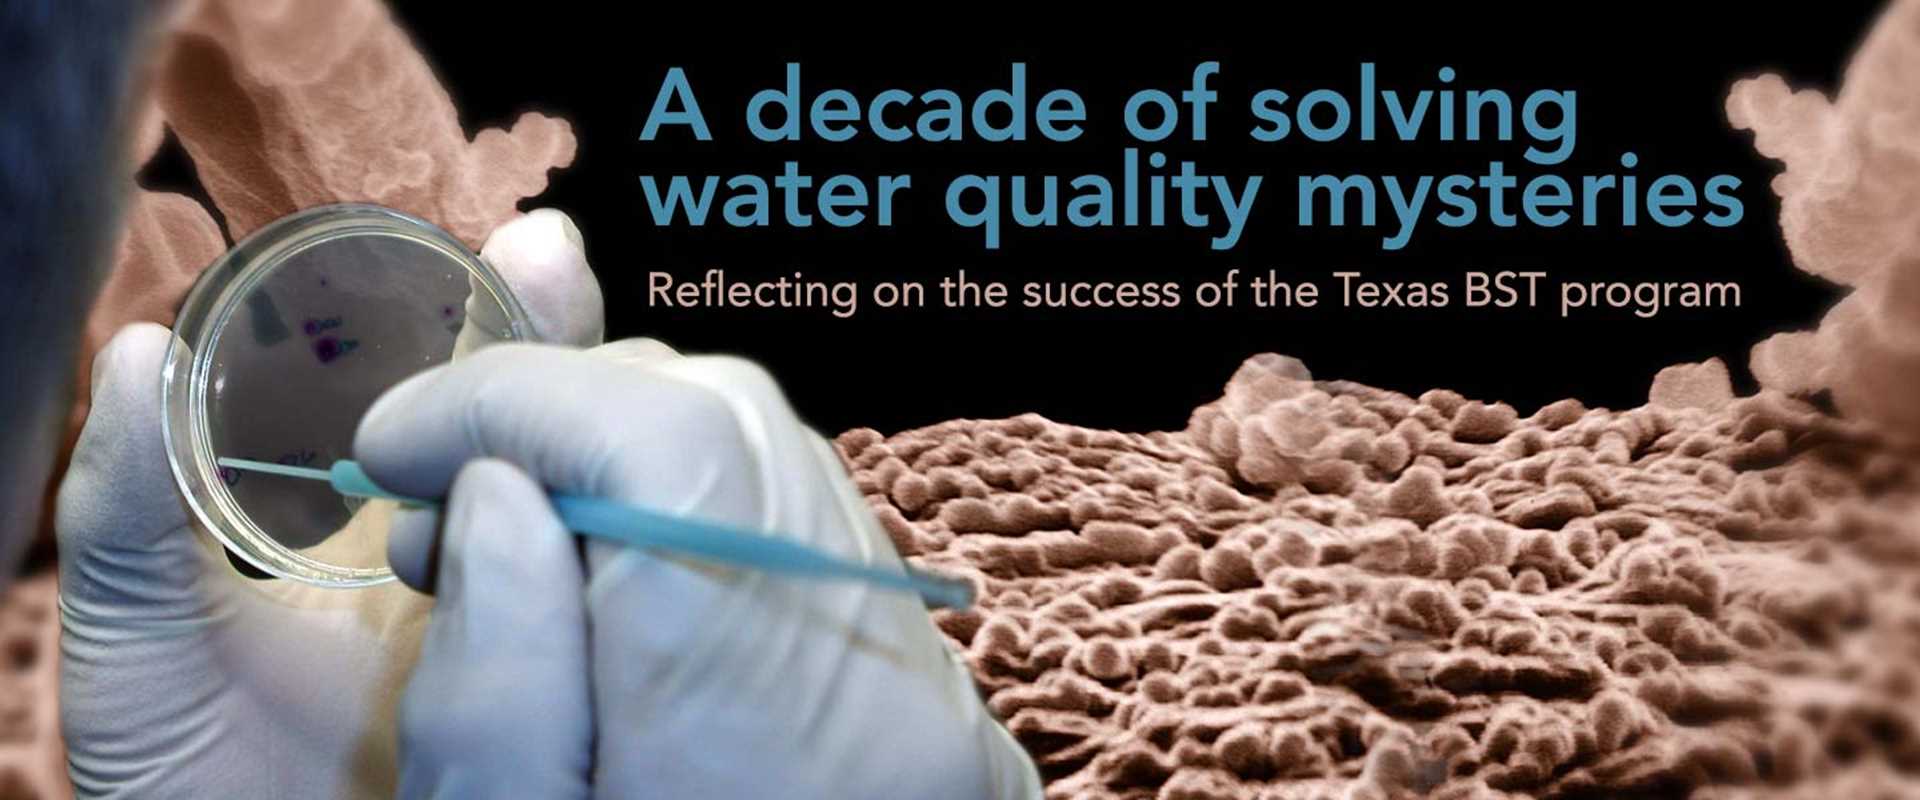 A decade of solving water quality mysteries